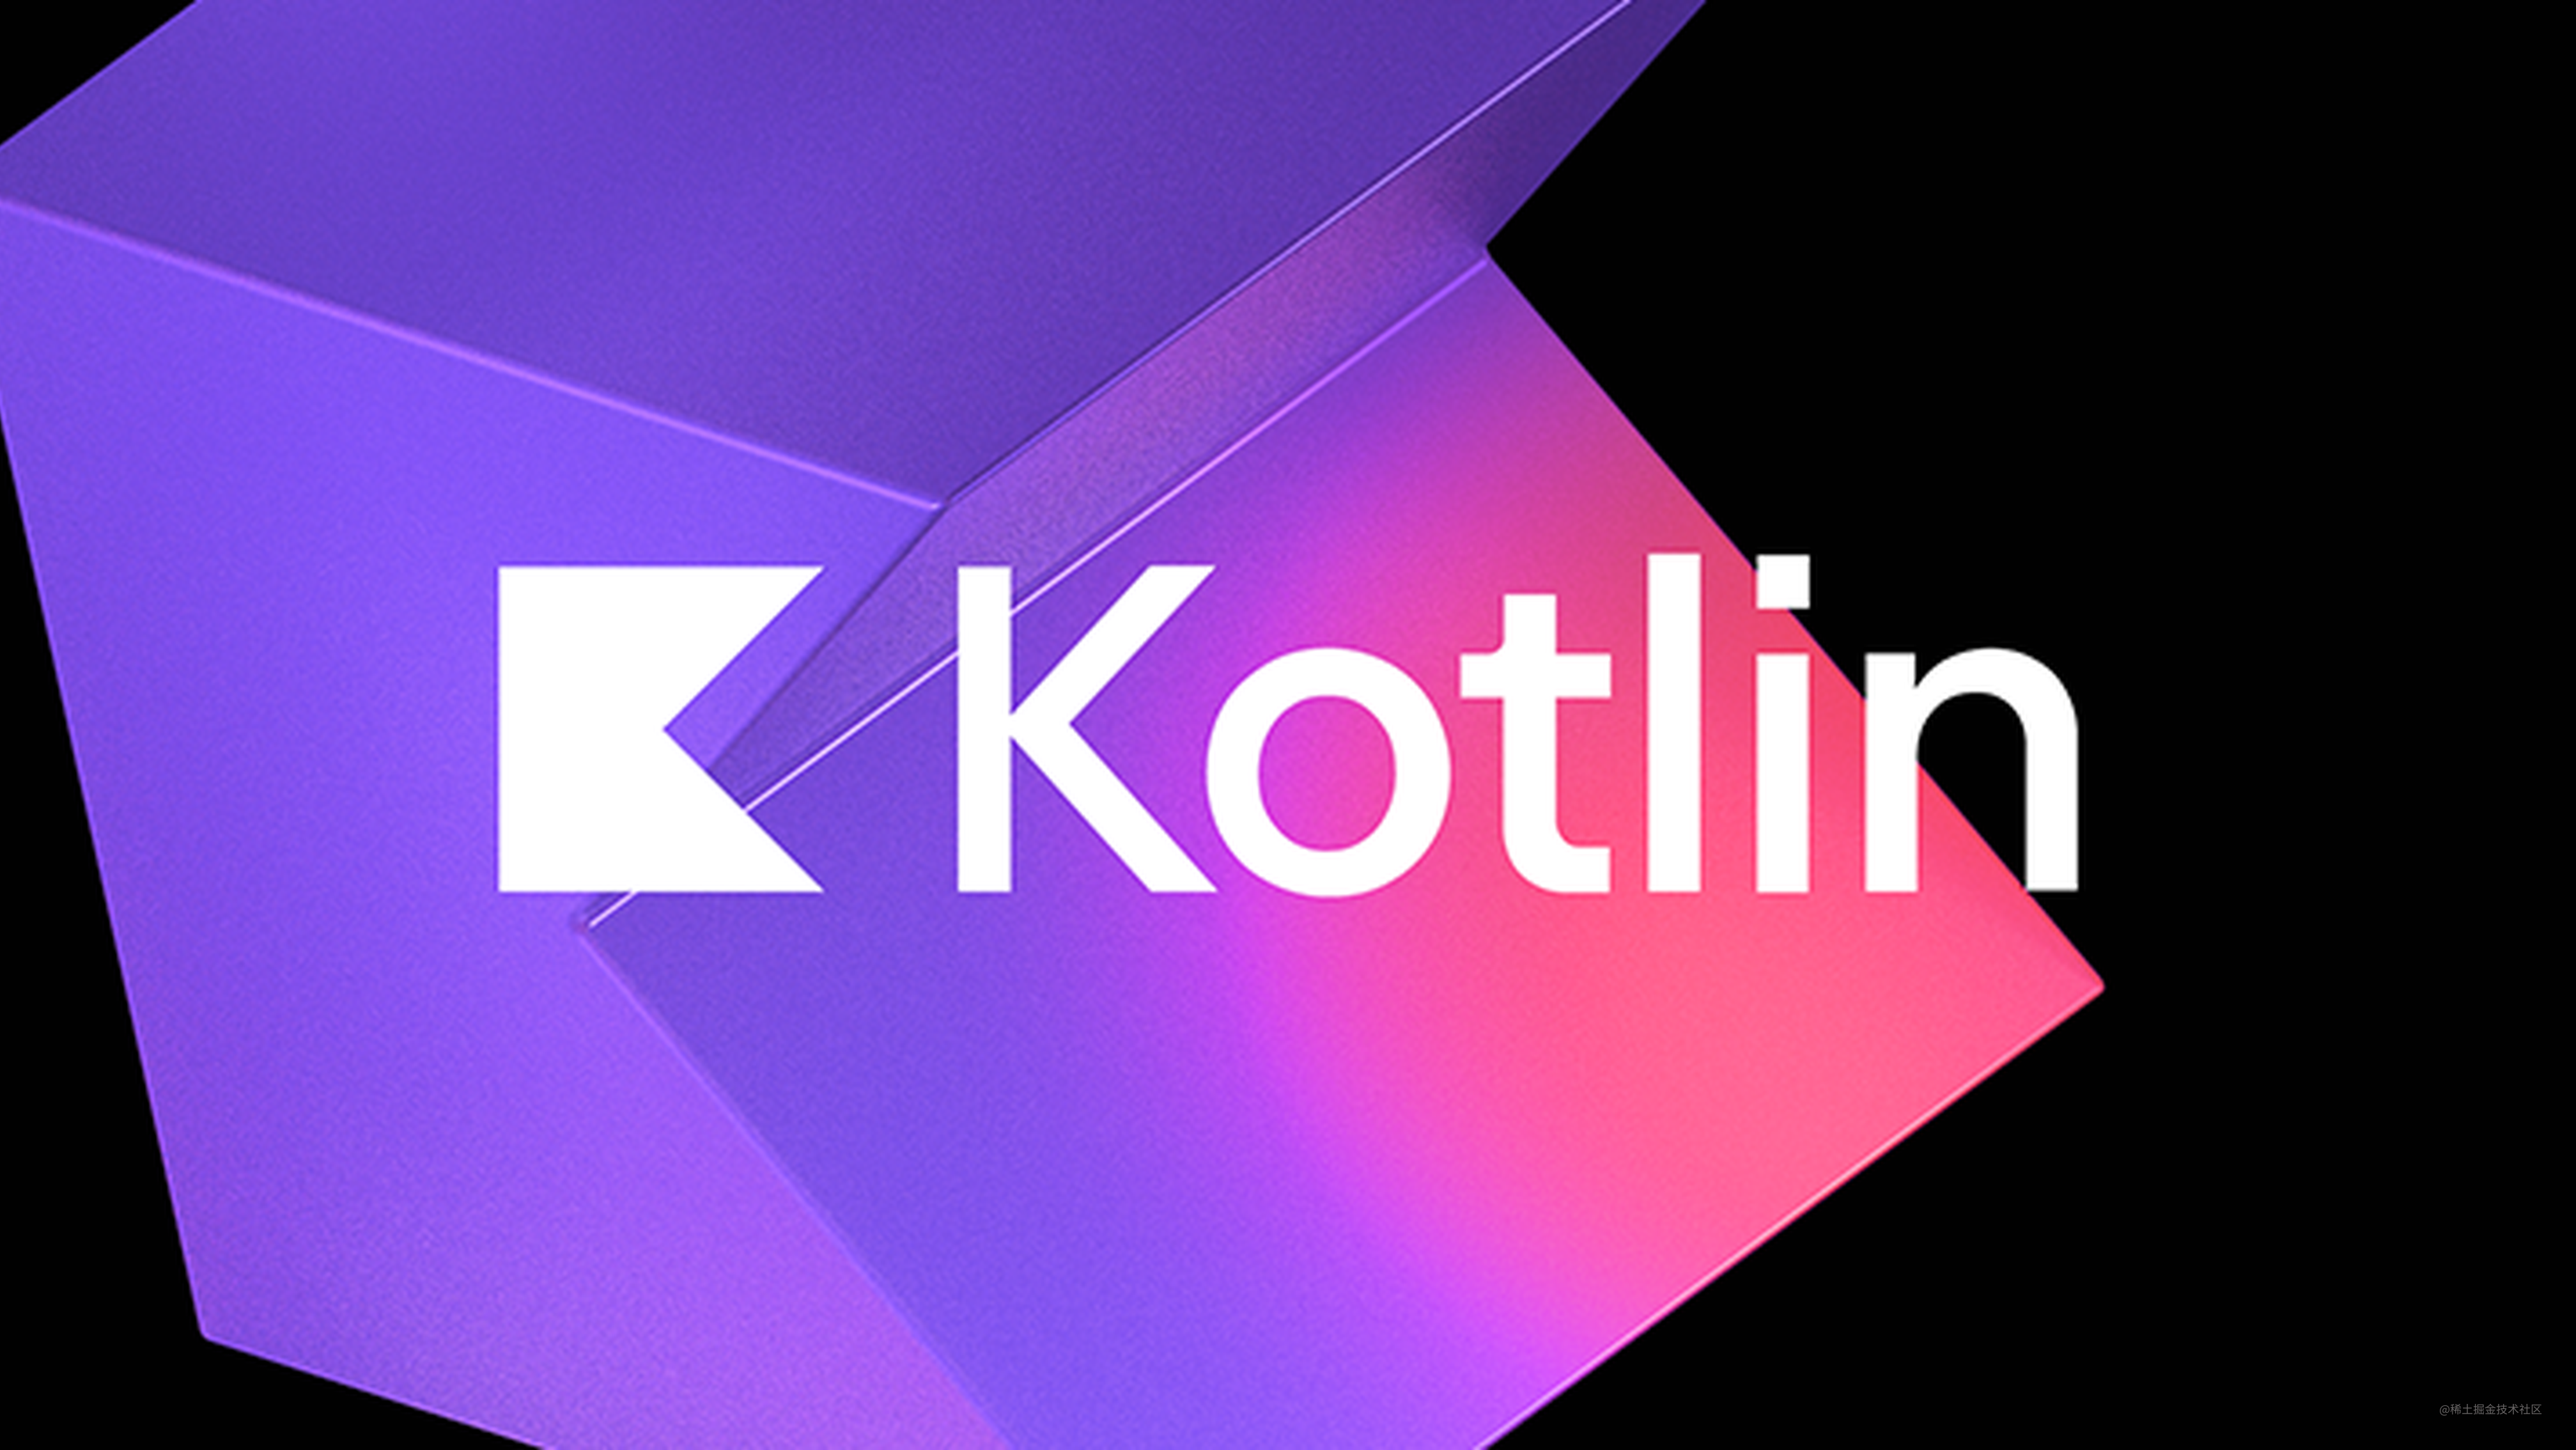 kotlin-android-extensions 插件将被正式移除，如何无缝迁移？